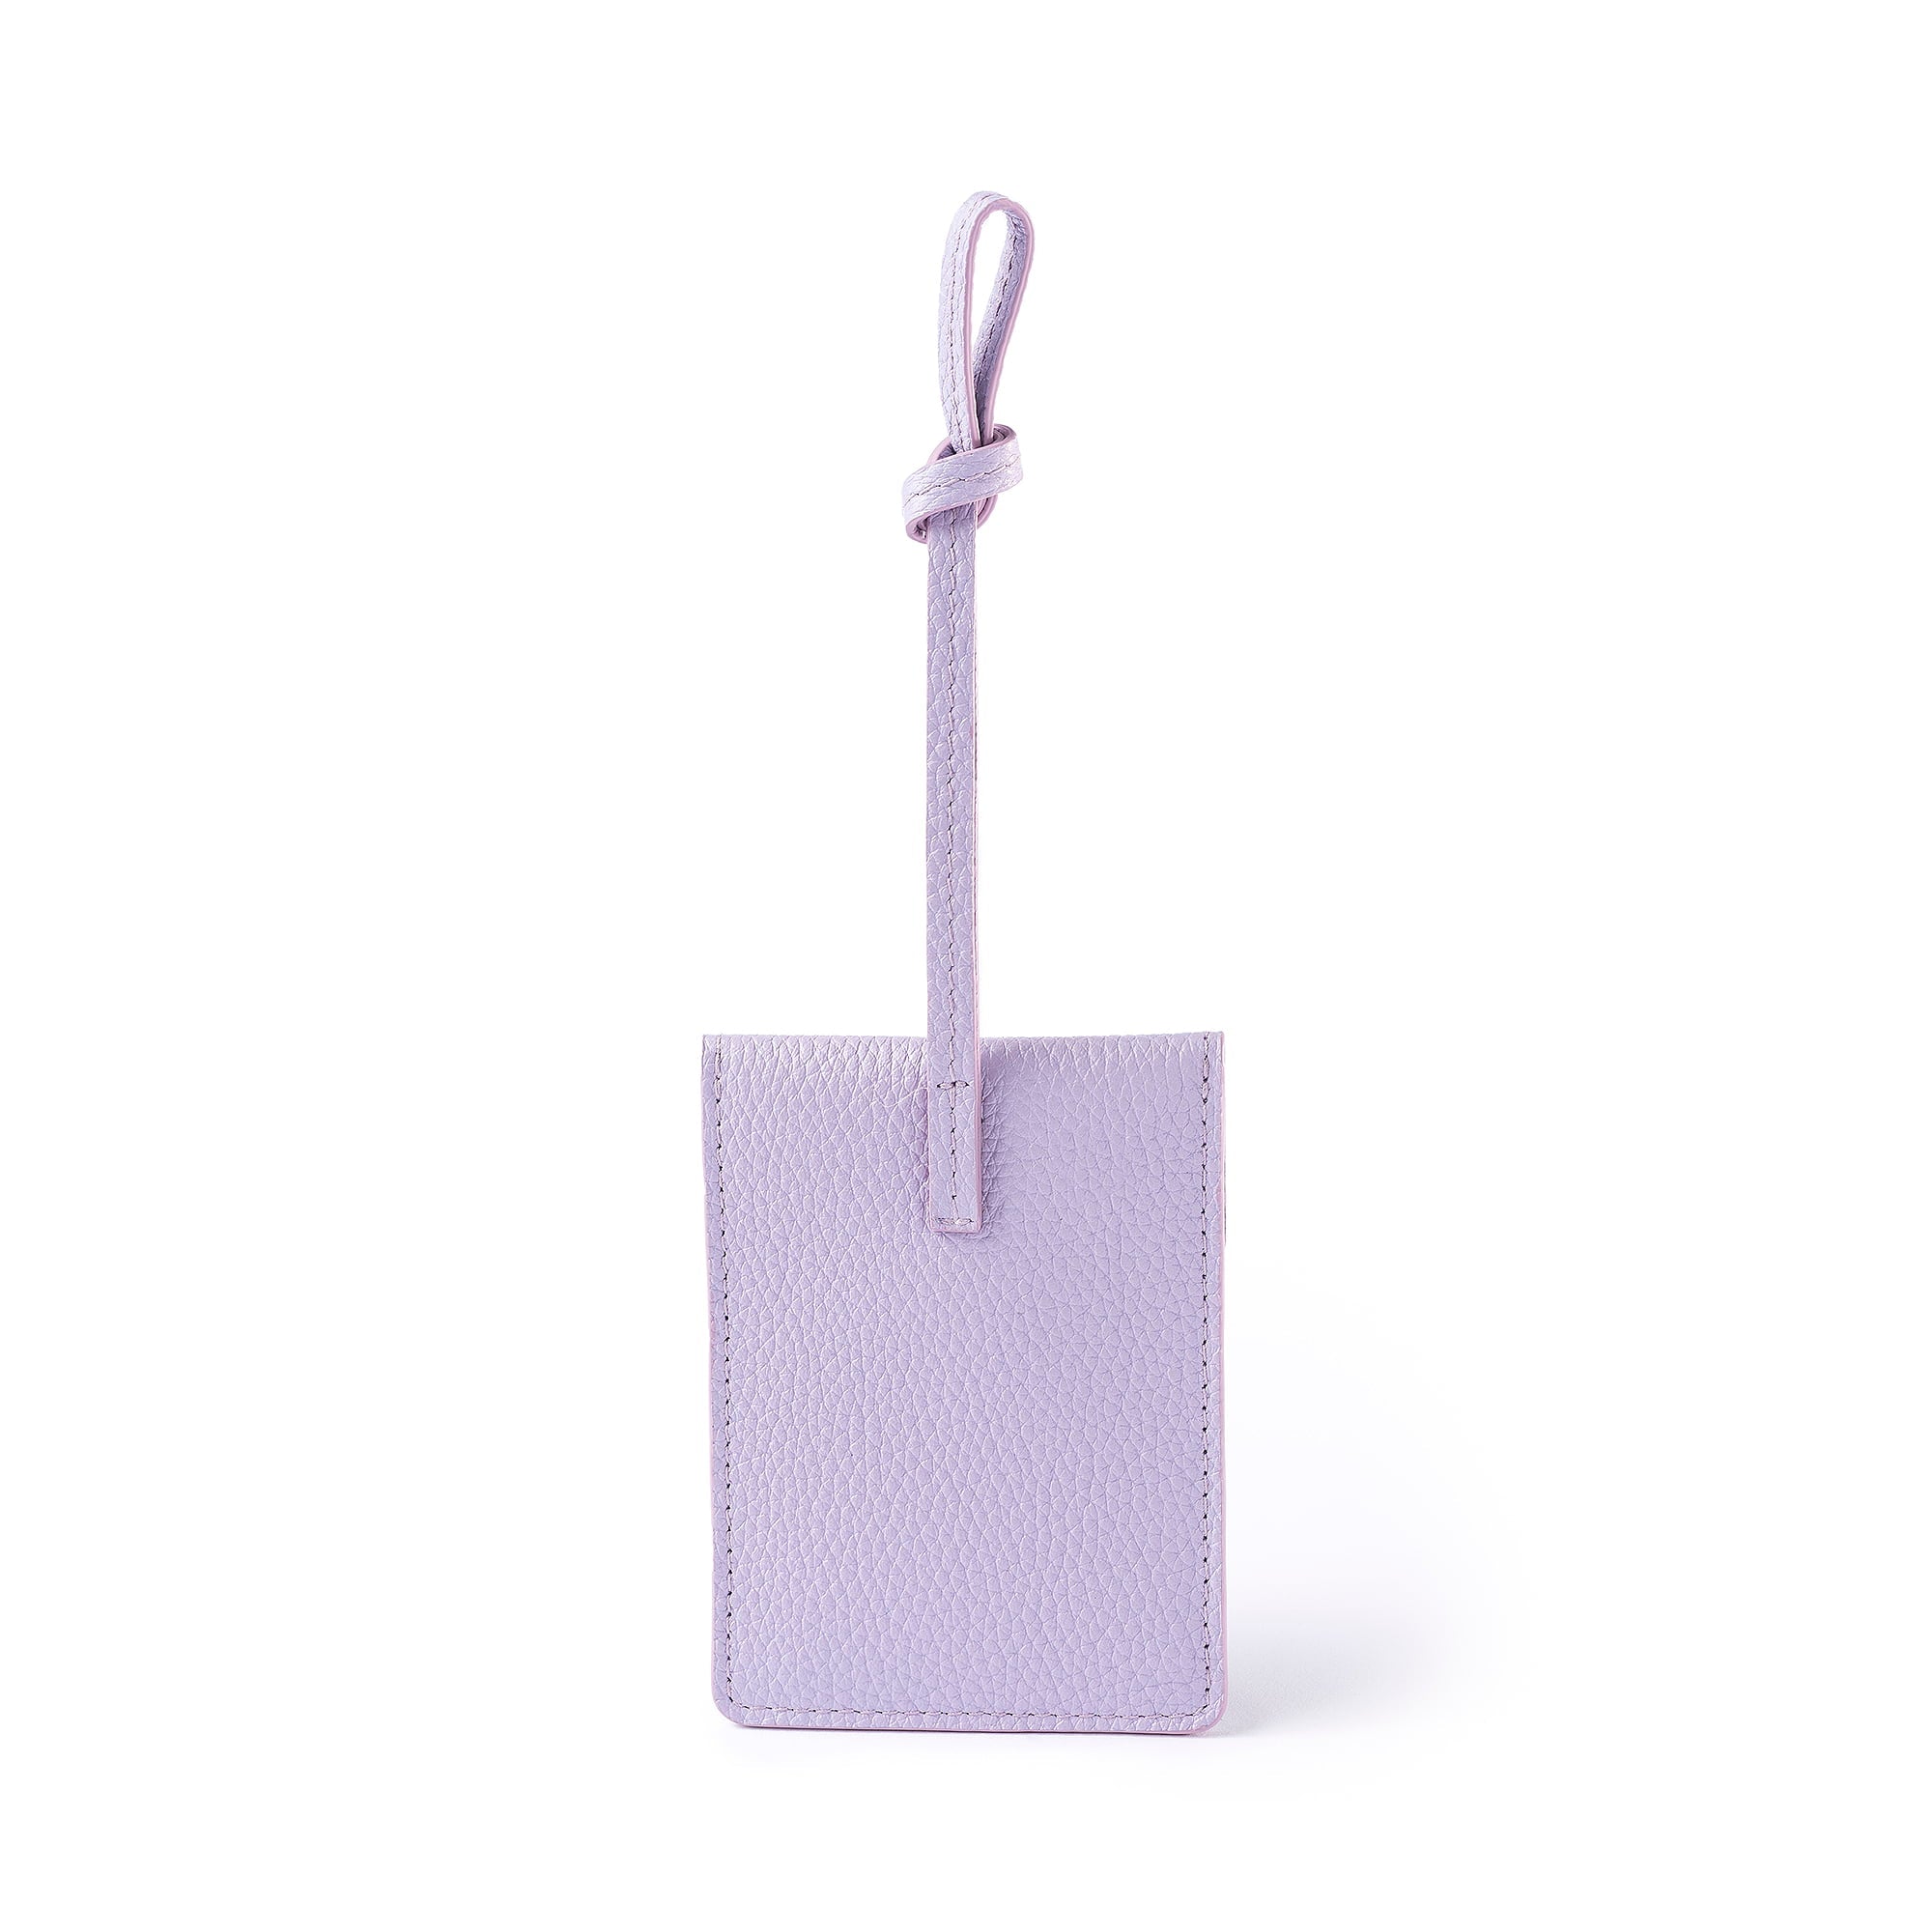 STOW Leather Multi Tag in Wild Lavender pebbled leather.